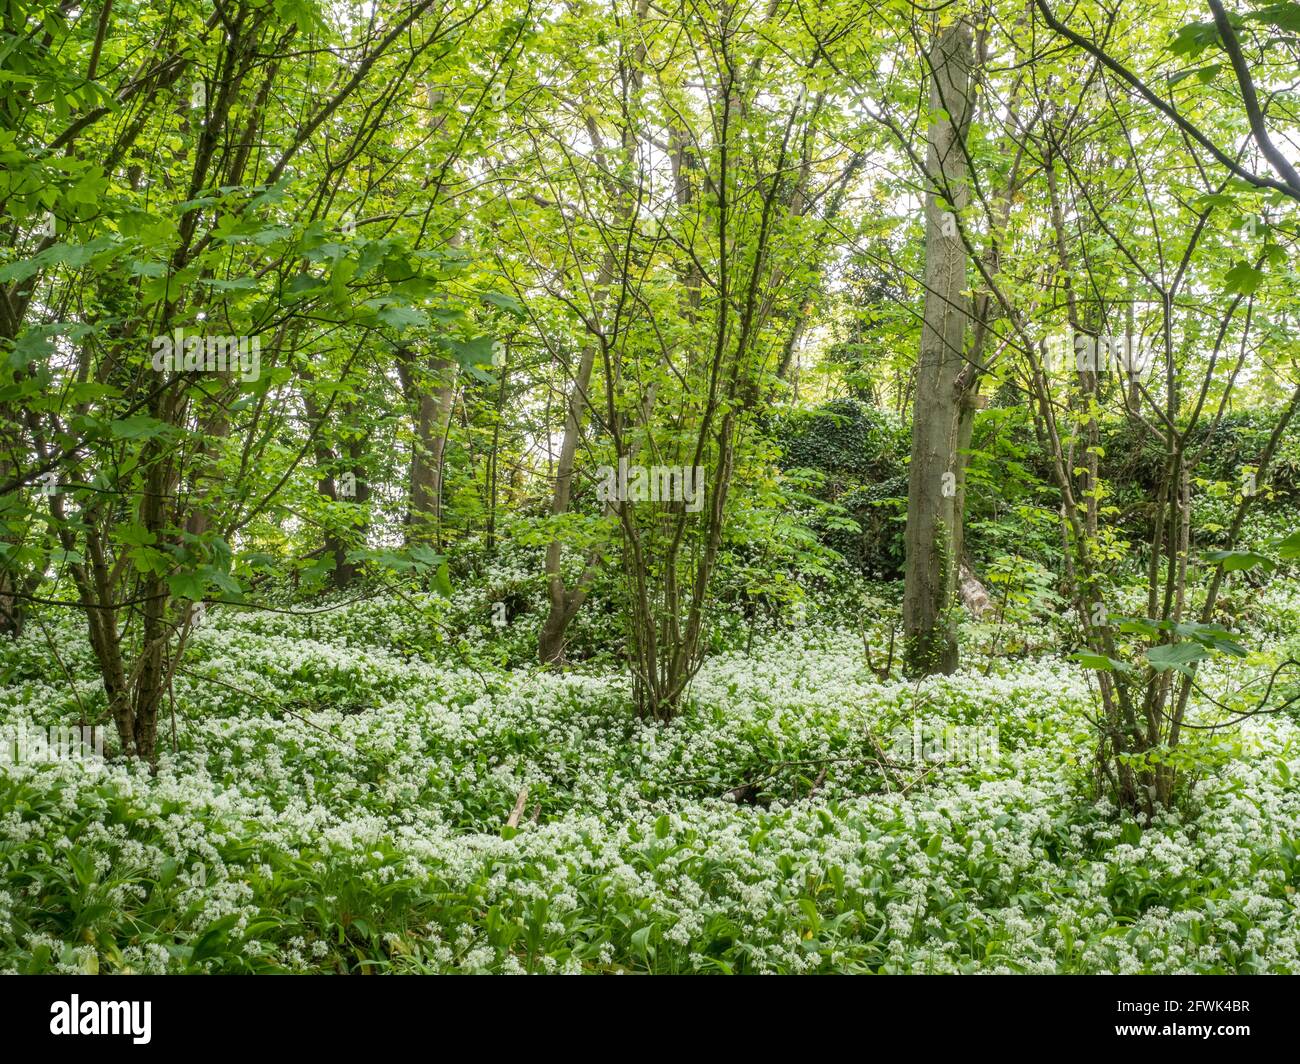 Wild garlic abundance in curves on a woodland floor curving and twisted in figure of eight 8 between trees Stock Photo